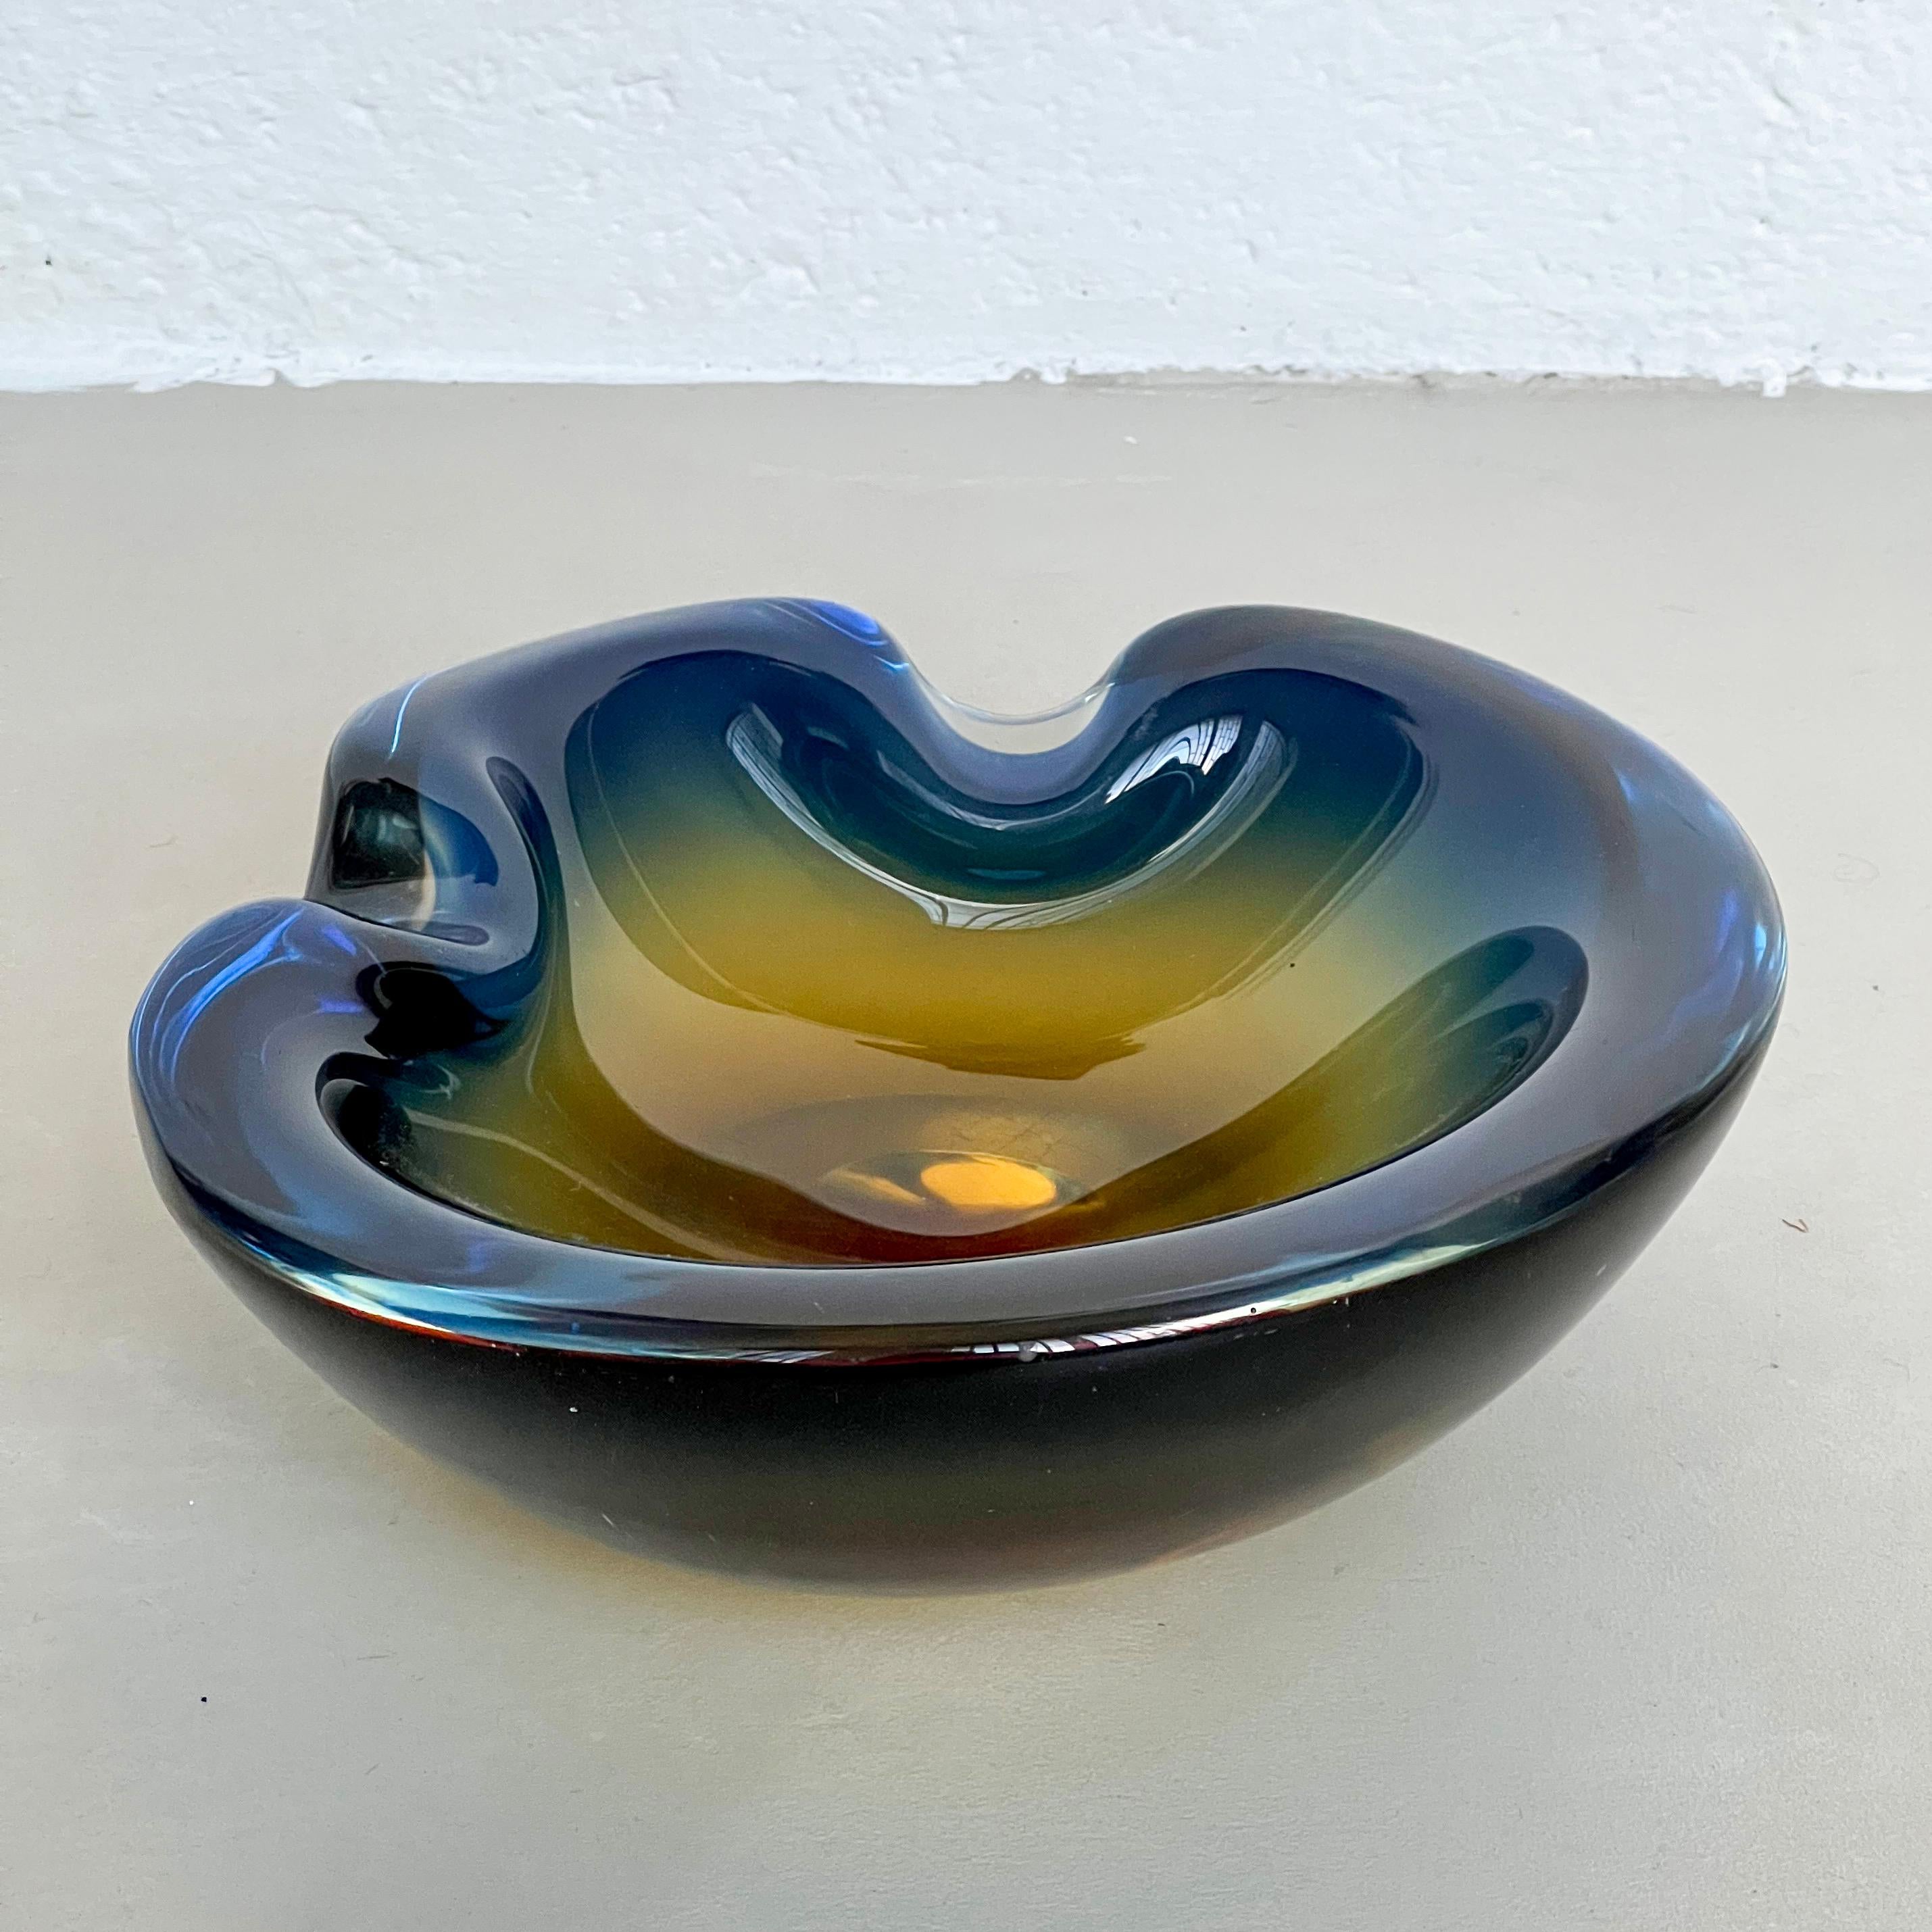 Mid-Century Modern Vintage Big and Massive Sommerso Murano Glass Bowl, Blue and Yellow, Flavio Poli For Sale